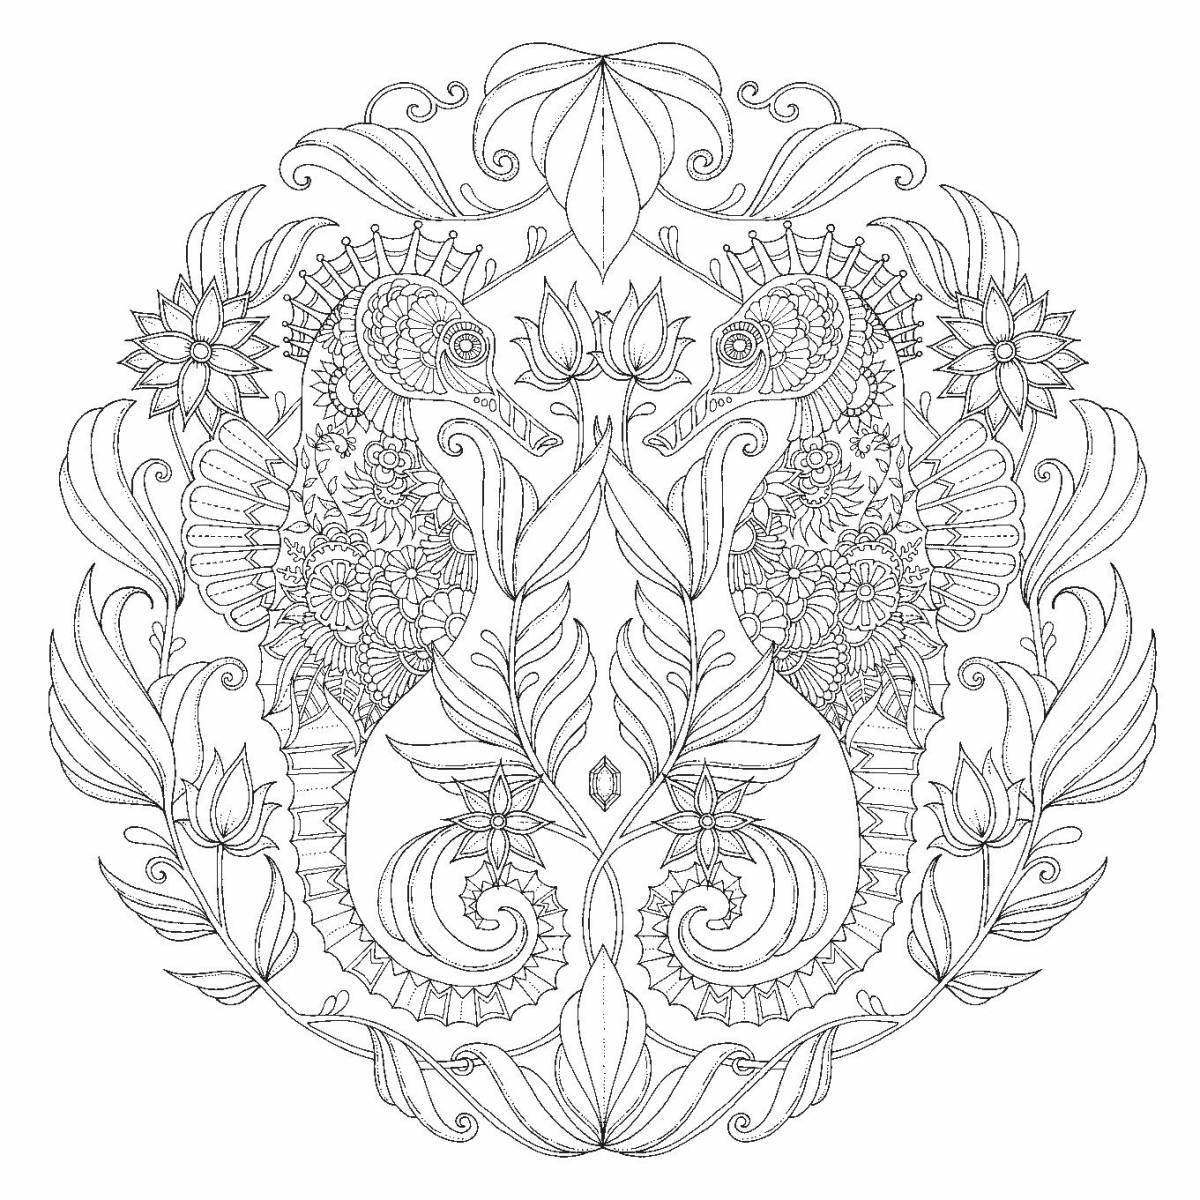 Mysterious joanna basford coloring book